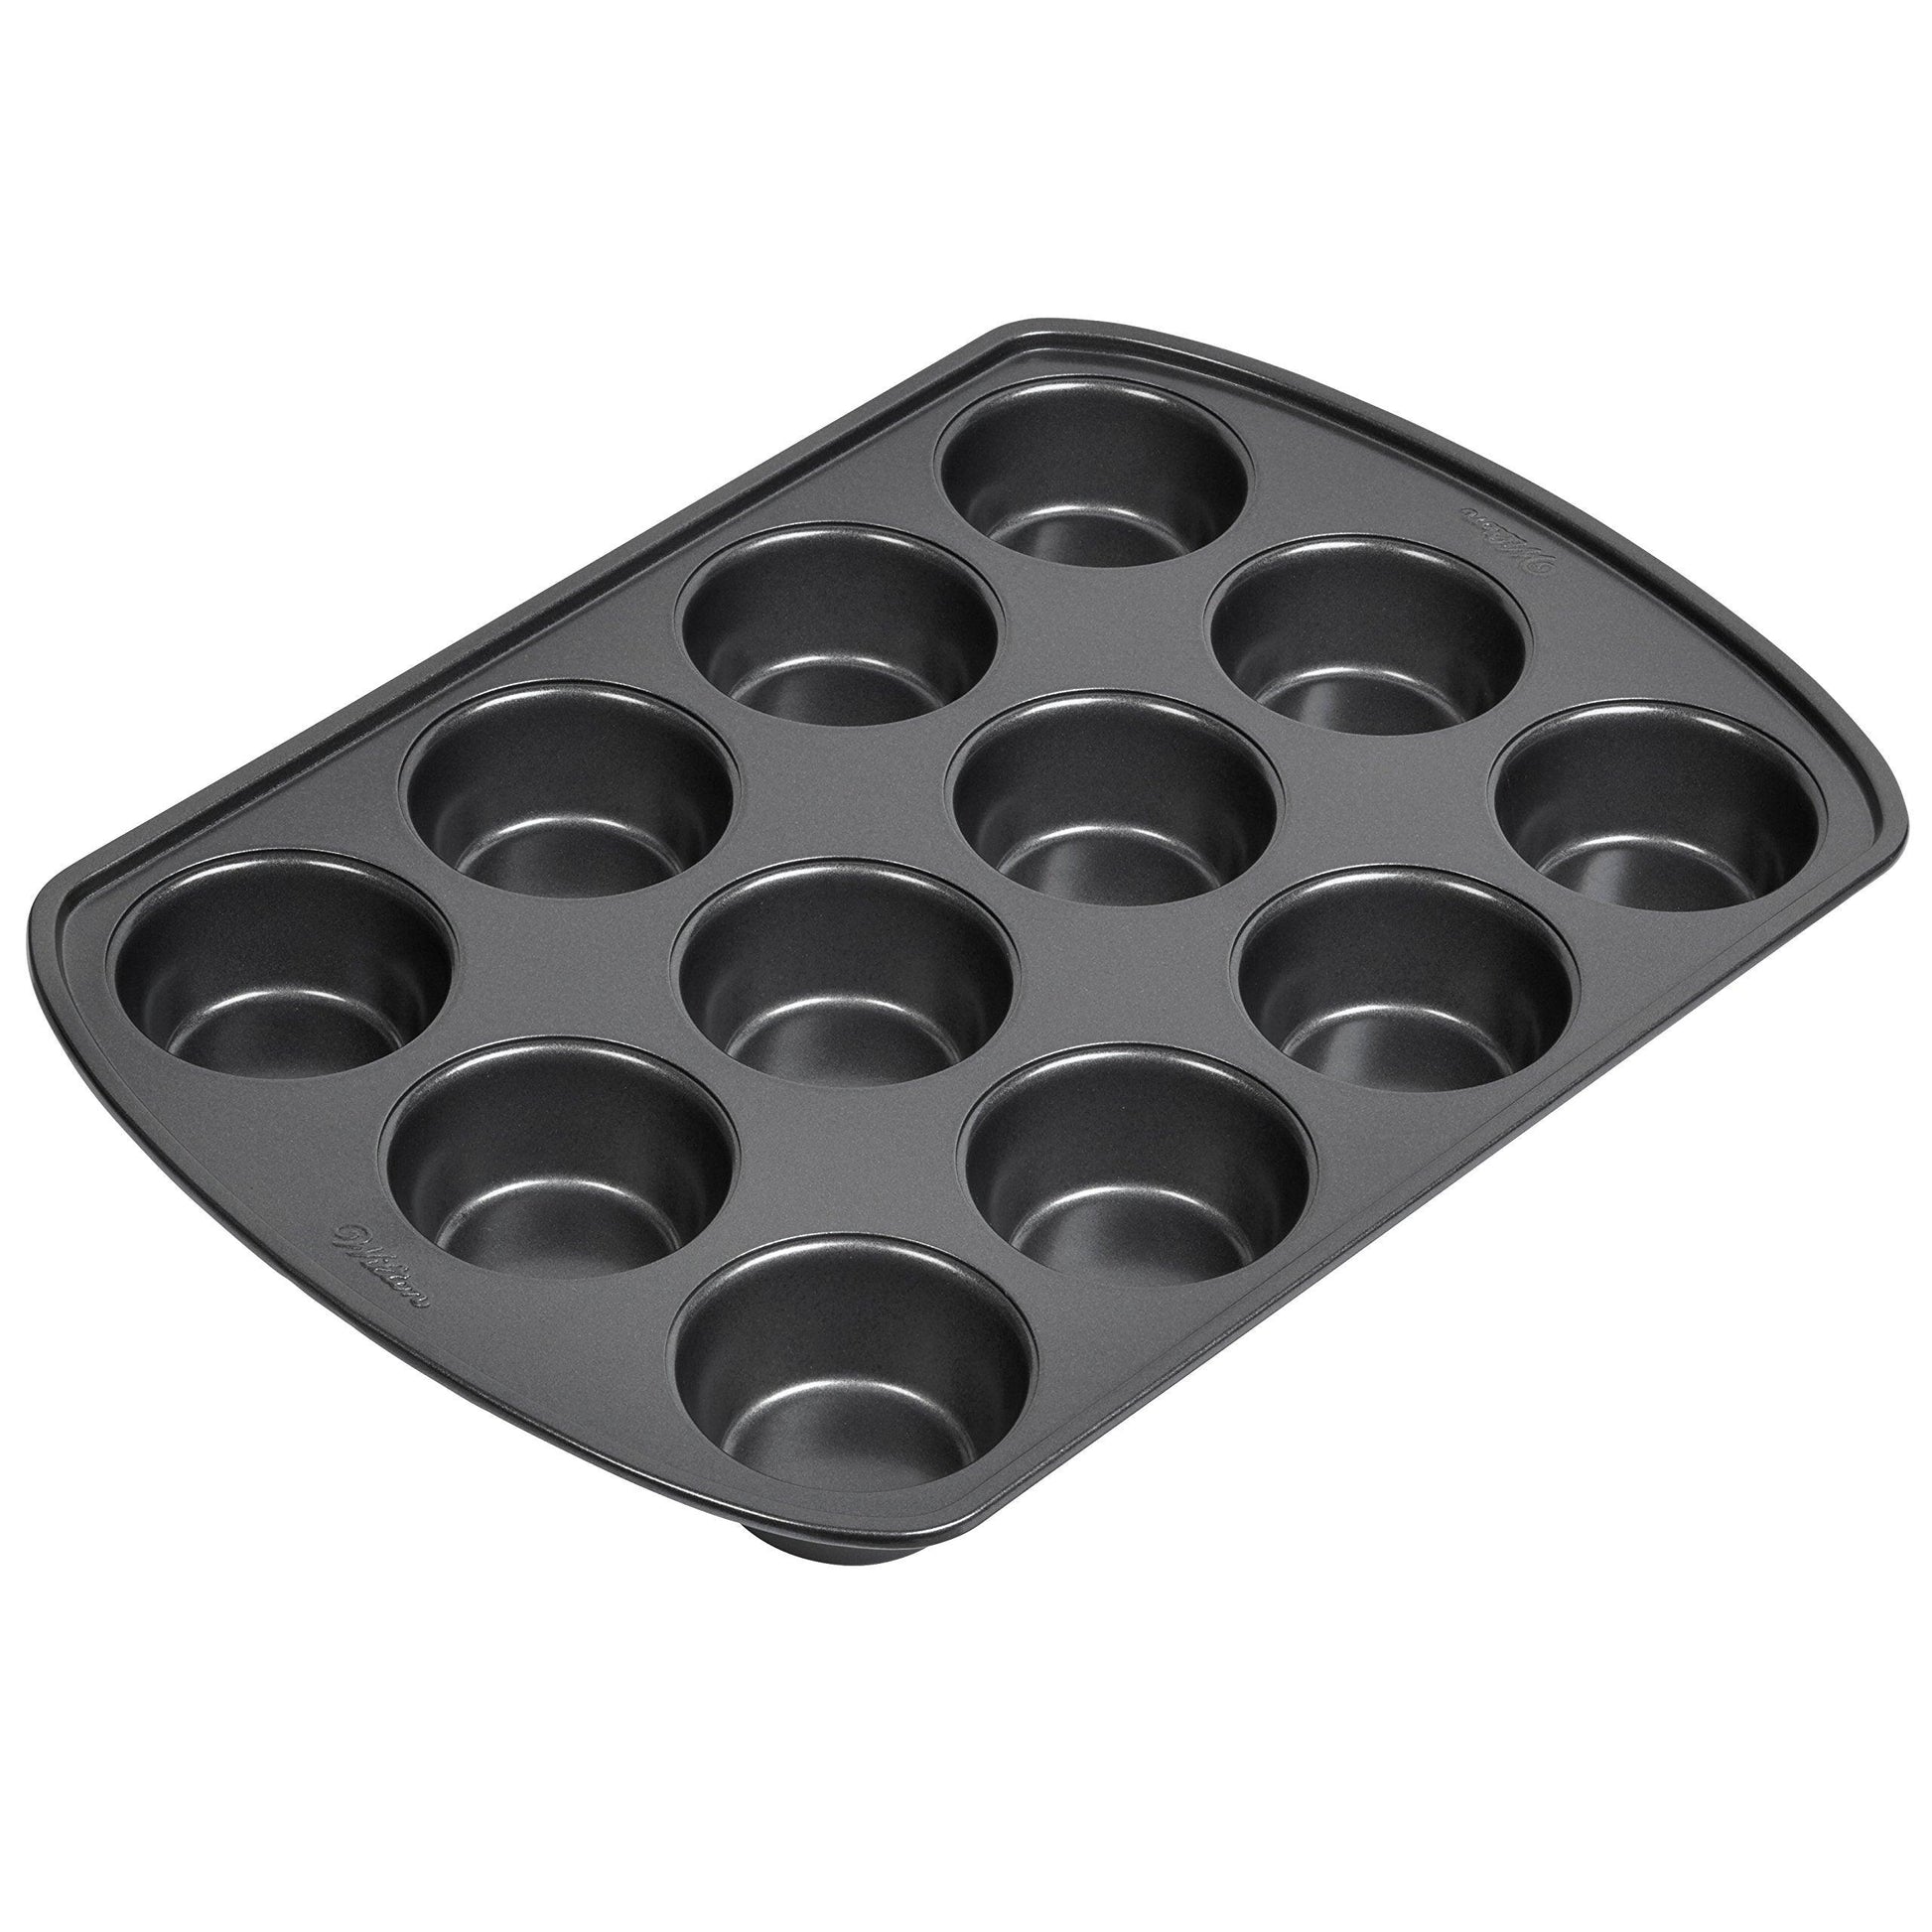 Wilton Perfect Results Premium Non-Stick Bakeware Cupcake Pan, 12-Cup, Steel - CookCave